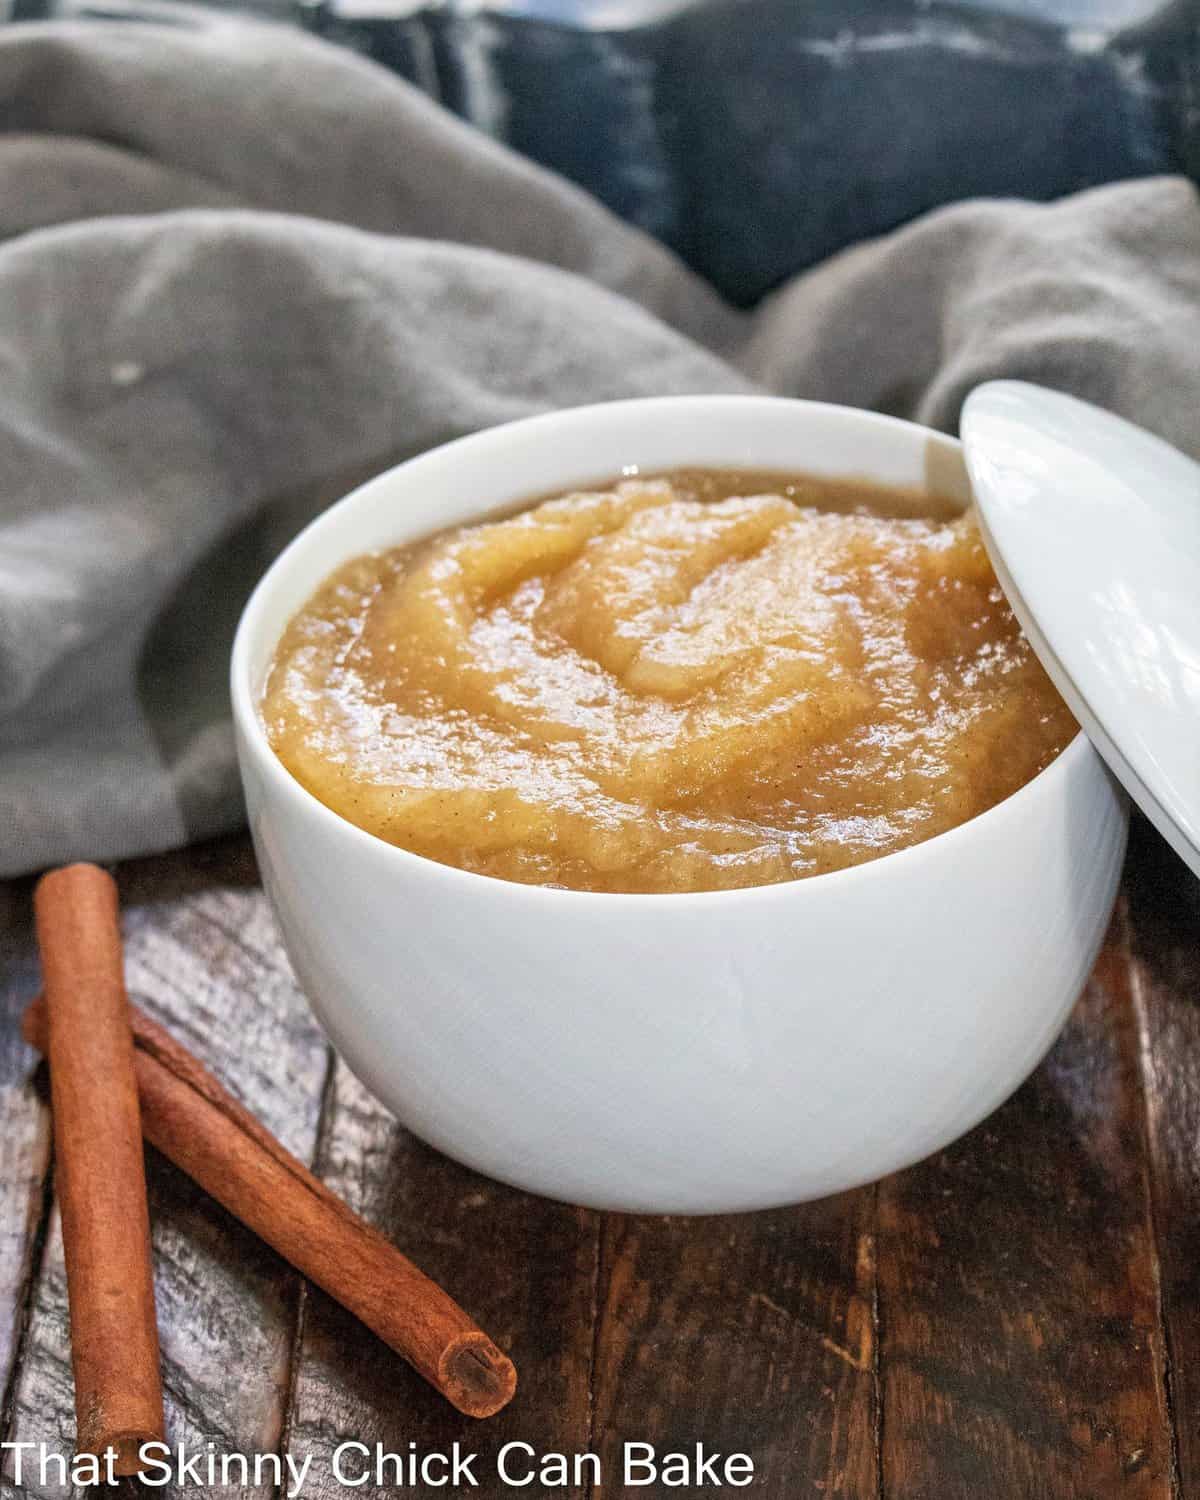 Cinnamon Spiced Applesauce - Easy & Wholesome! - That Skinny Chick Can Bake